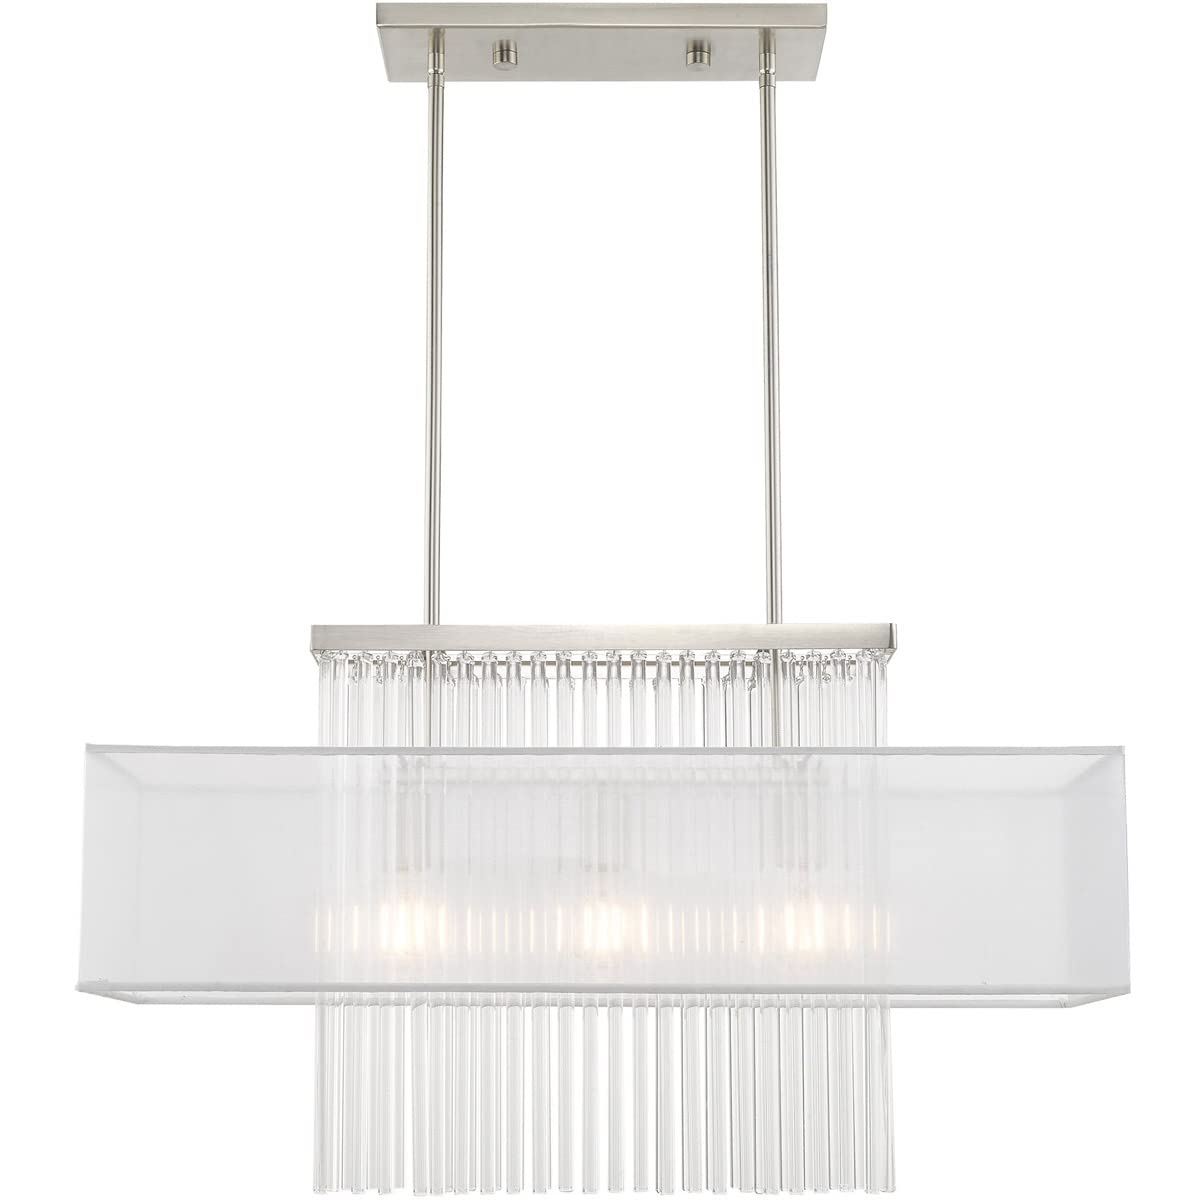 Livex Lighting 41143-91 Alexis - Three Light Linear Chandelier, Brushed Nickel Finish with Translucent Fabric Shade with Clear Rods Crystal